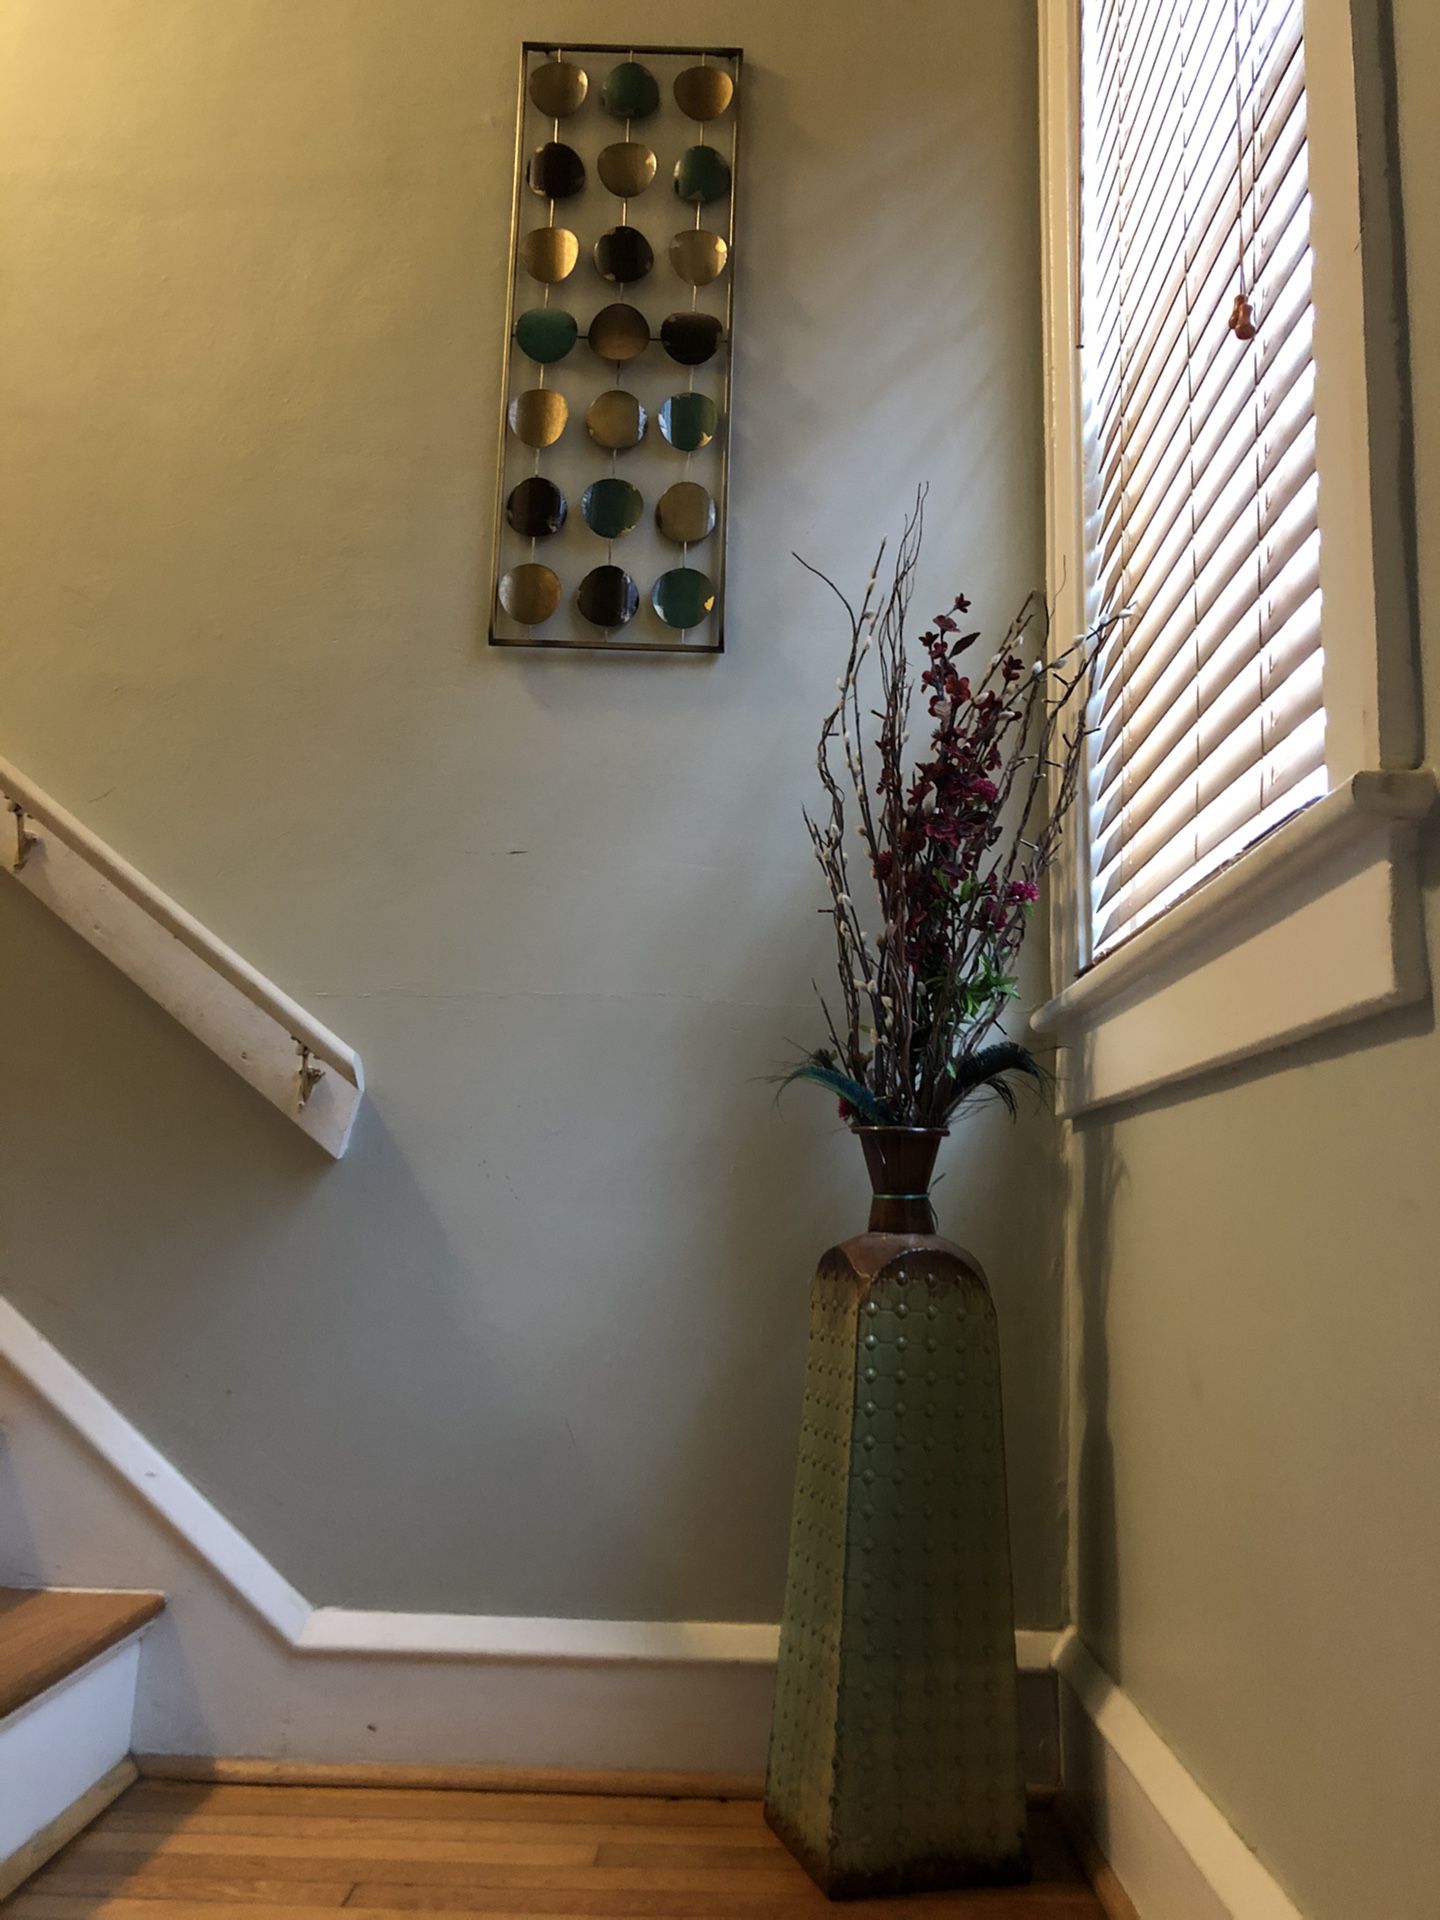 Home Decor Picture and vase with flowers